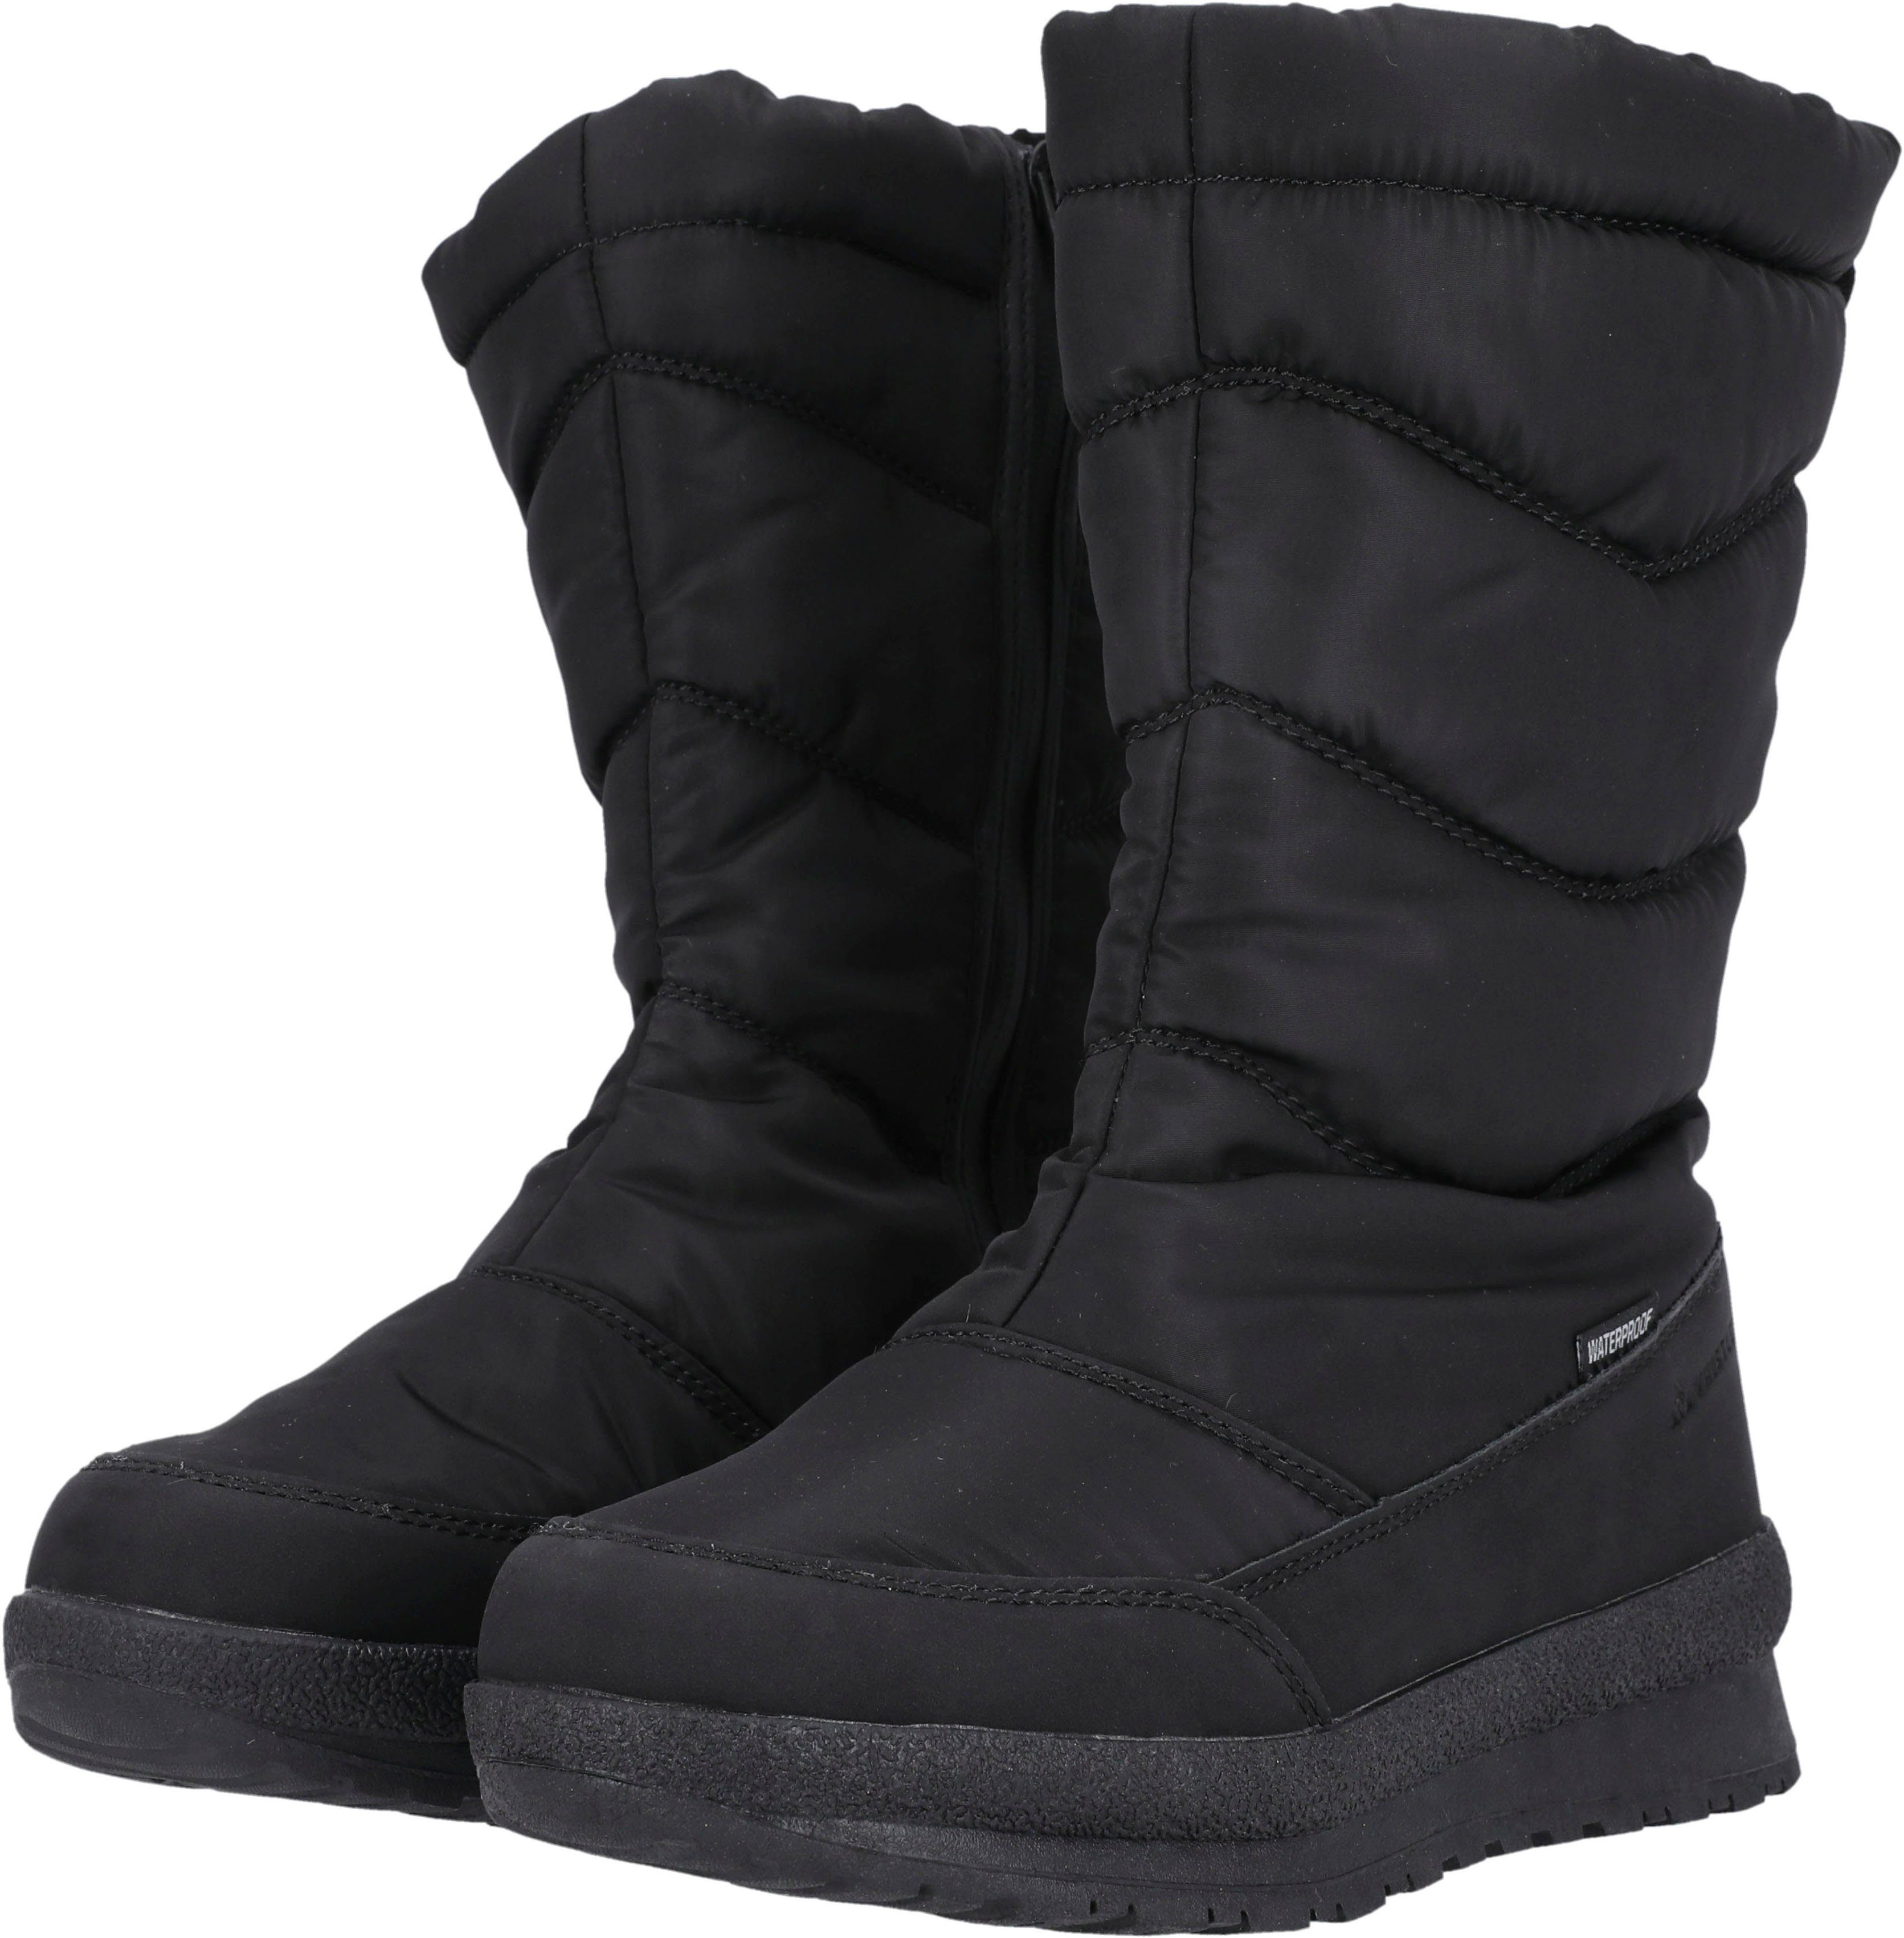 WHISTLER WHW234153 Winterboots Warmfutter | Boots